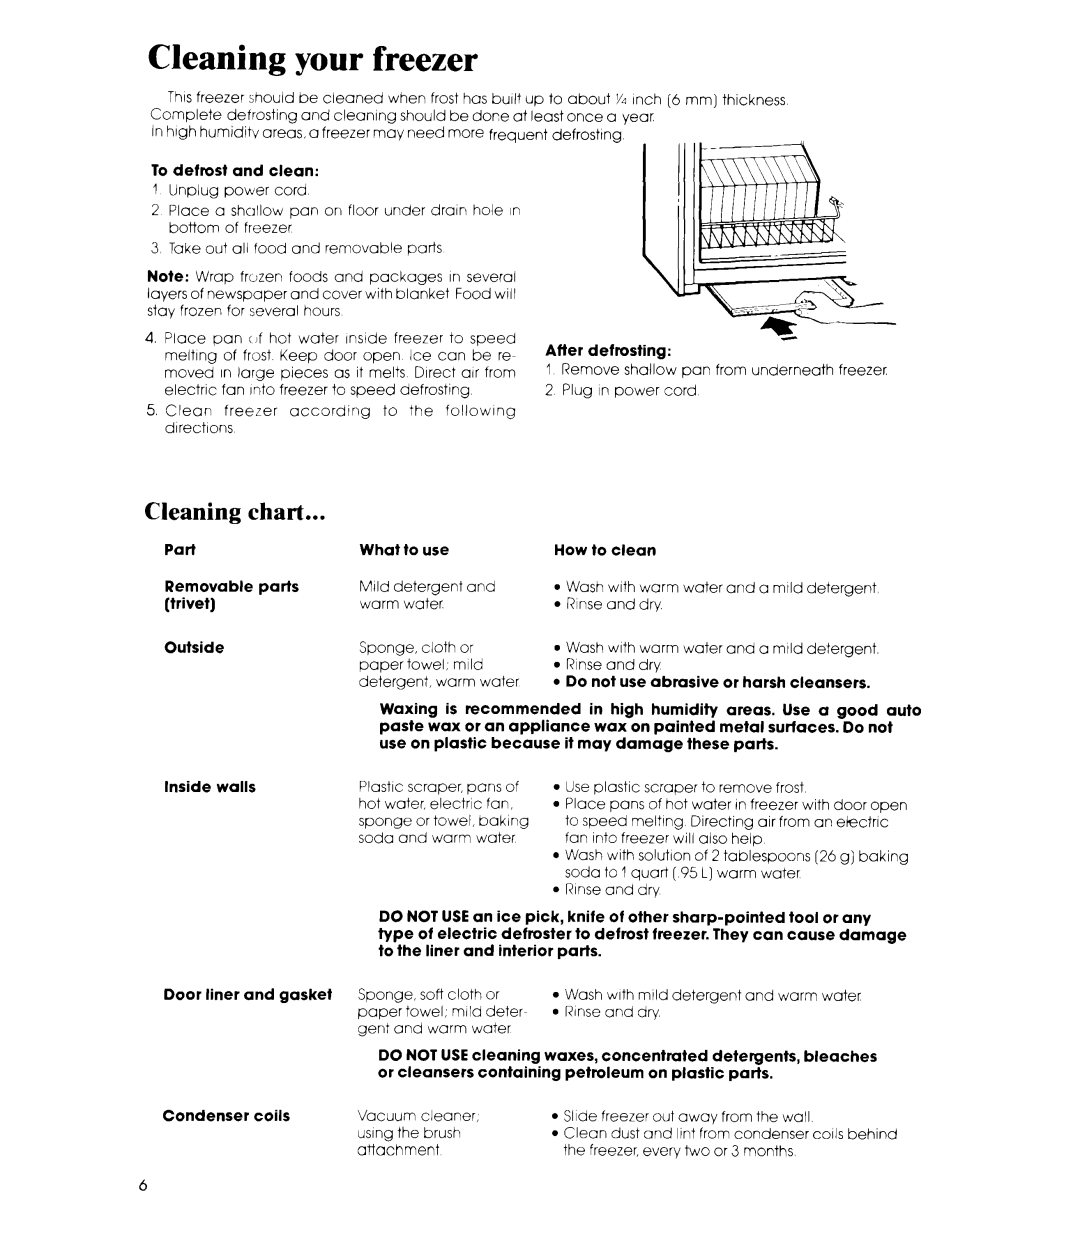 Whirlpool EV150L manual Cleaning your freezer, Cleaning chart 